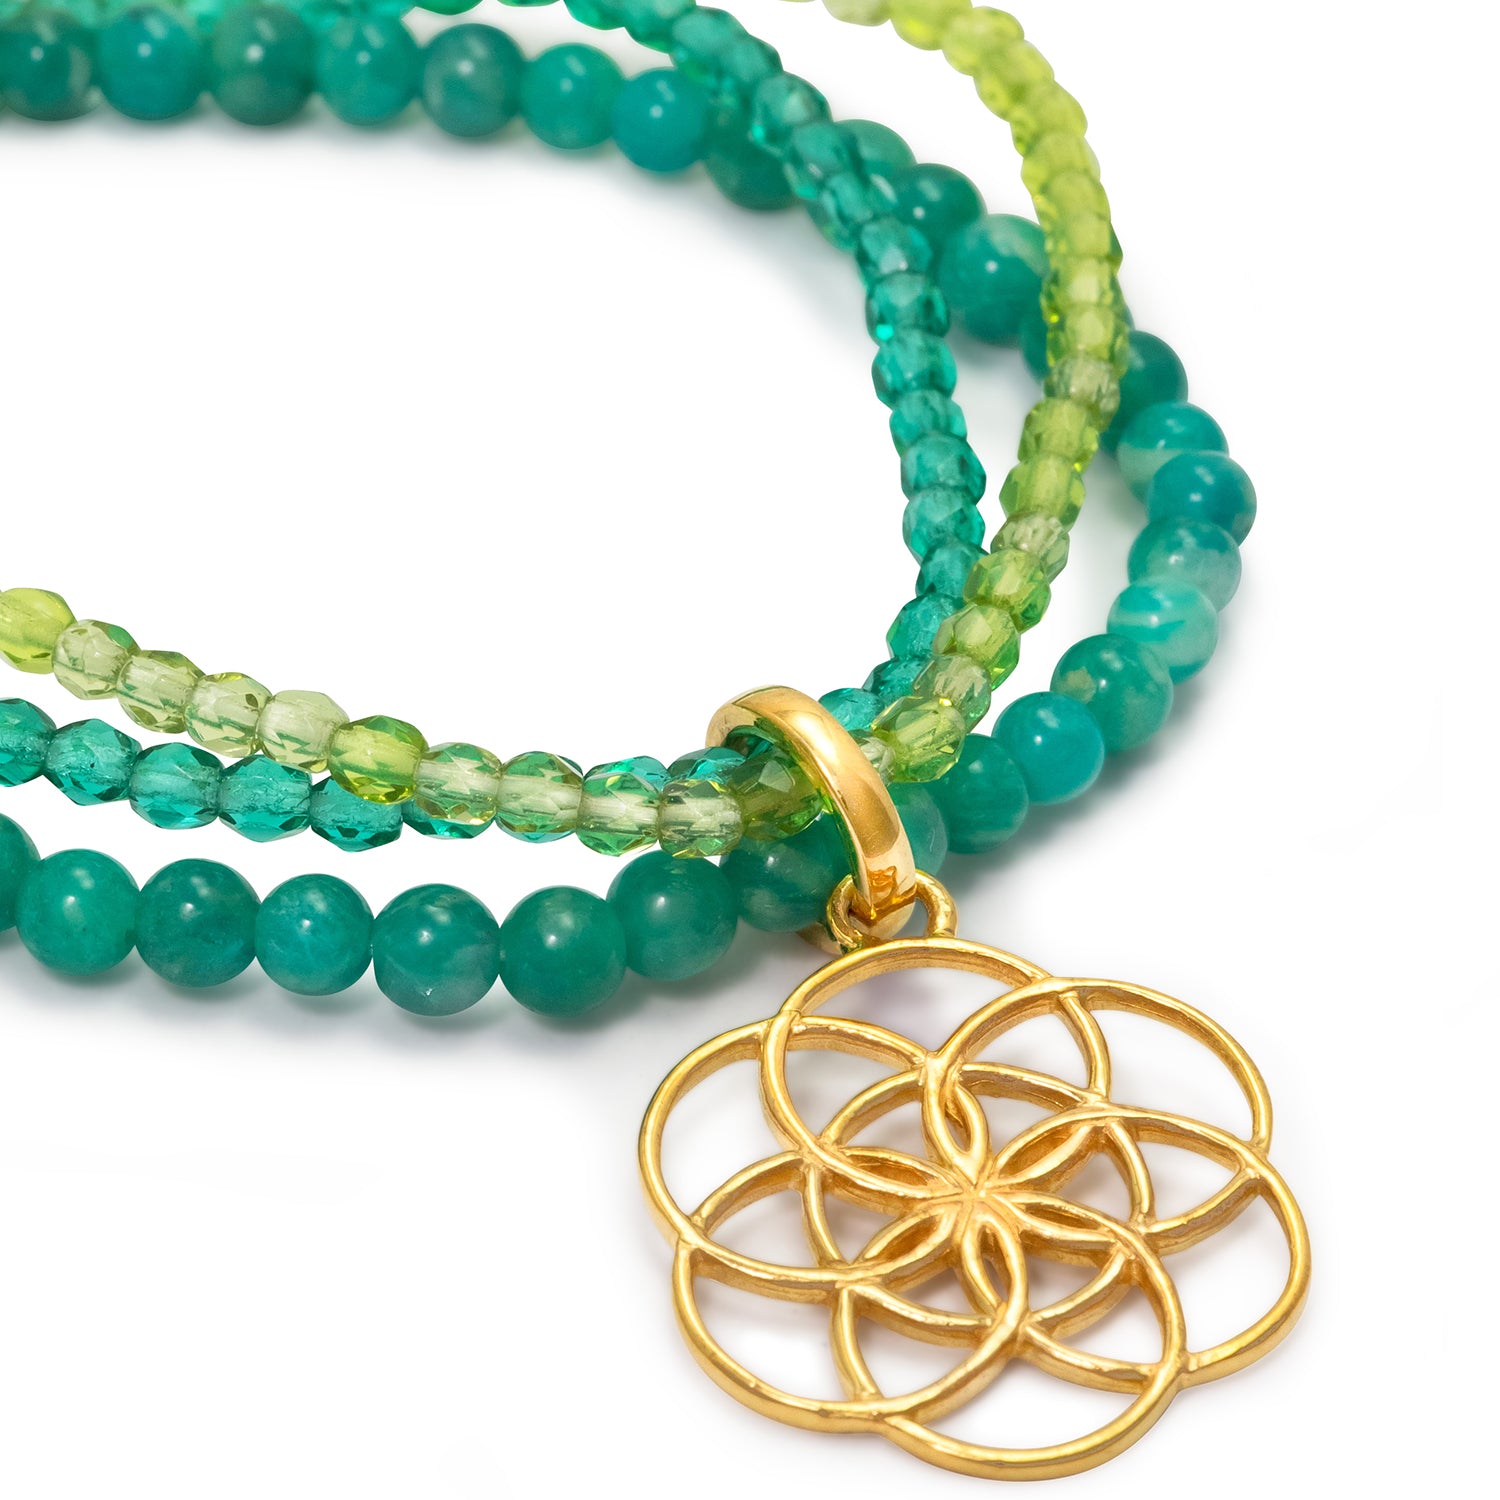 Seed of Life bracelet with Amazonite gemstones and pendant made of high-quality gold-plated sterling silver